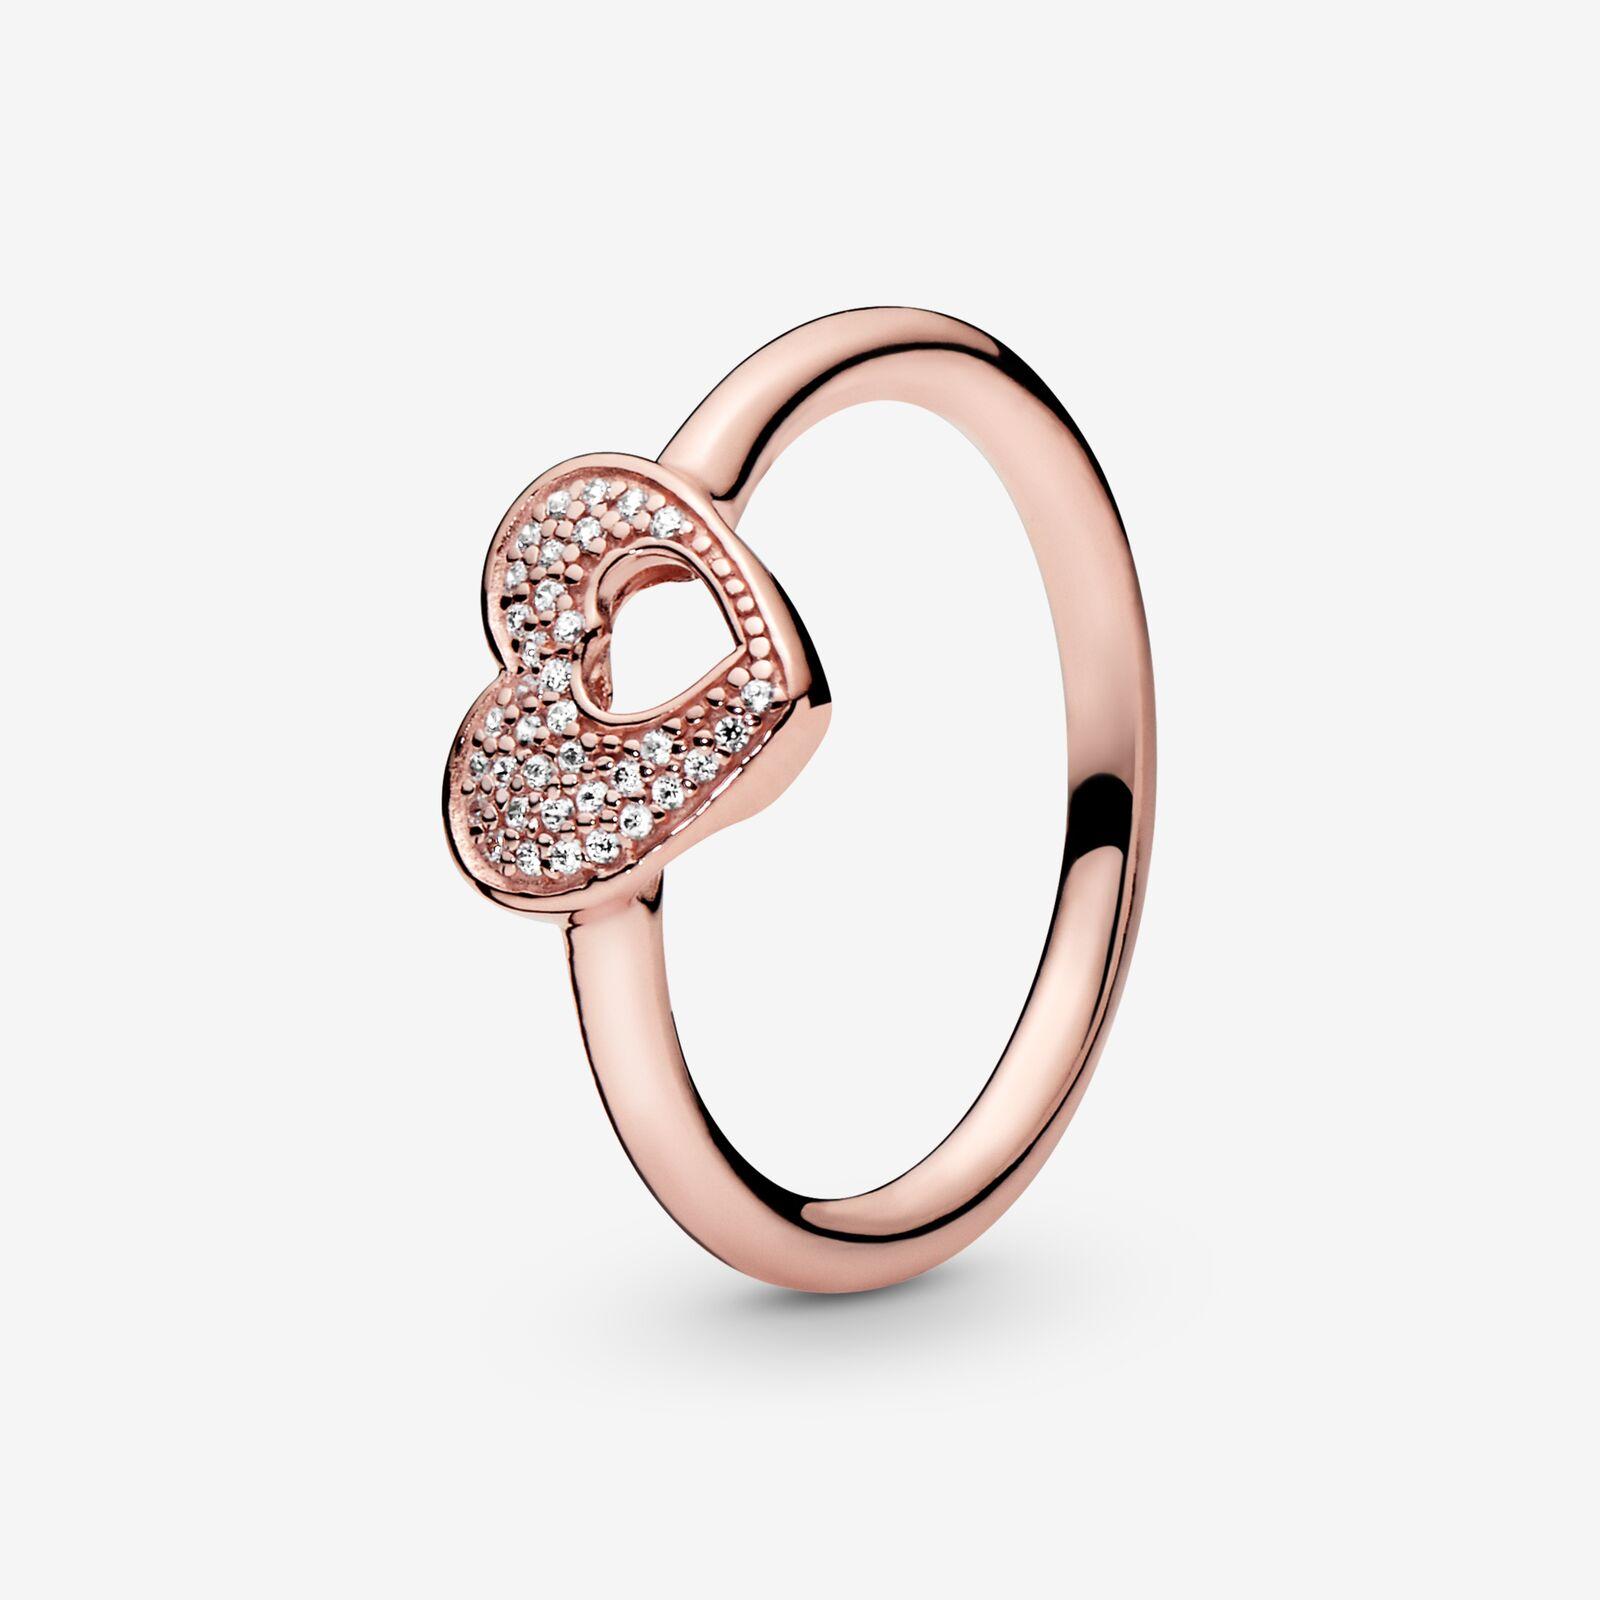 Pandora Symbolising Two Hearts That Become One, Our Puzzle Rings Will Make  Her Heart Skip A #PANDORA #PANDORAValentines Discover PANDORA Puzzle Rings:  Facebook | clinicadamama.com.br